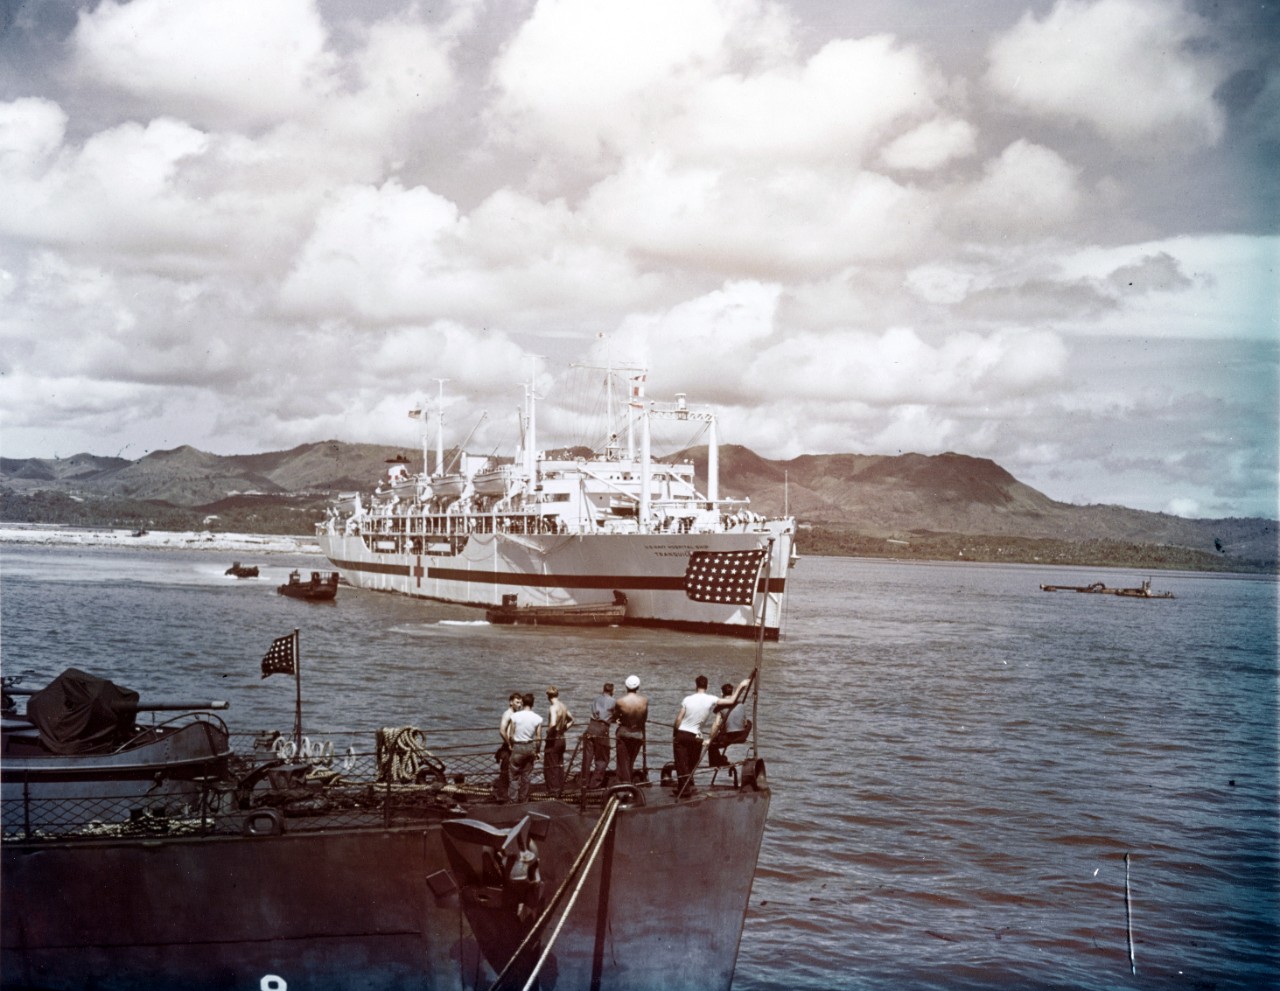 Photo #: 80-G-K-5987 (Color)  Loss of USS Indianapolis, July 1945